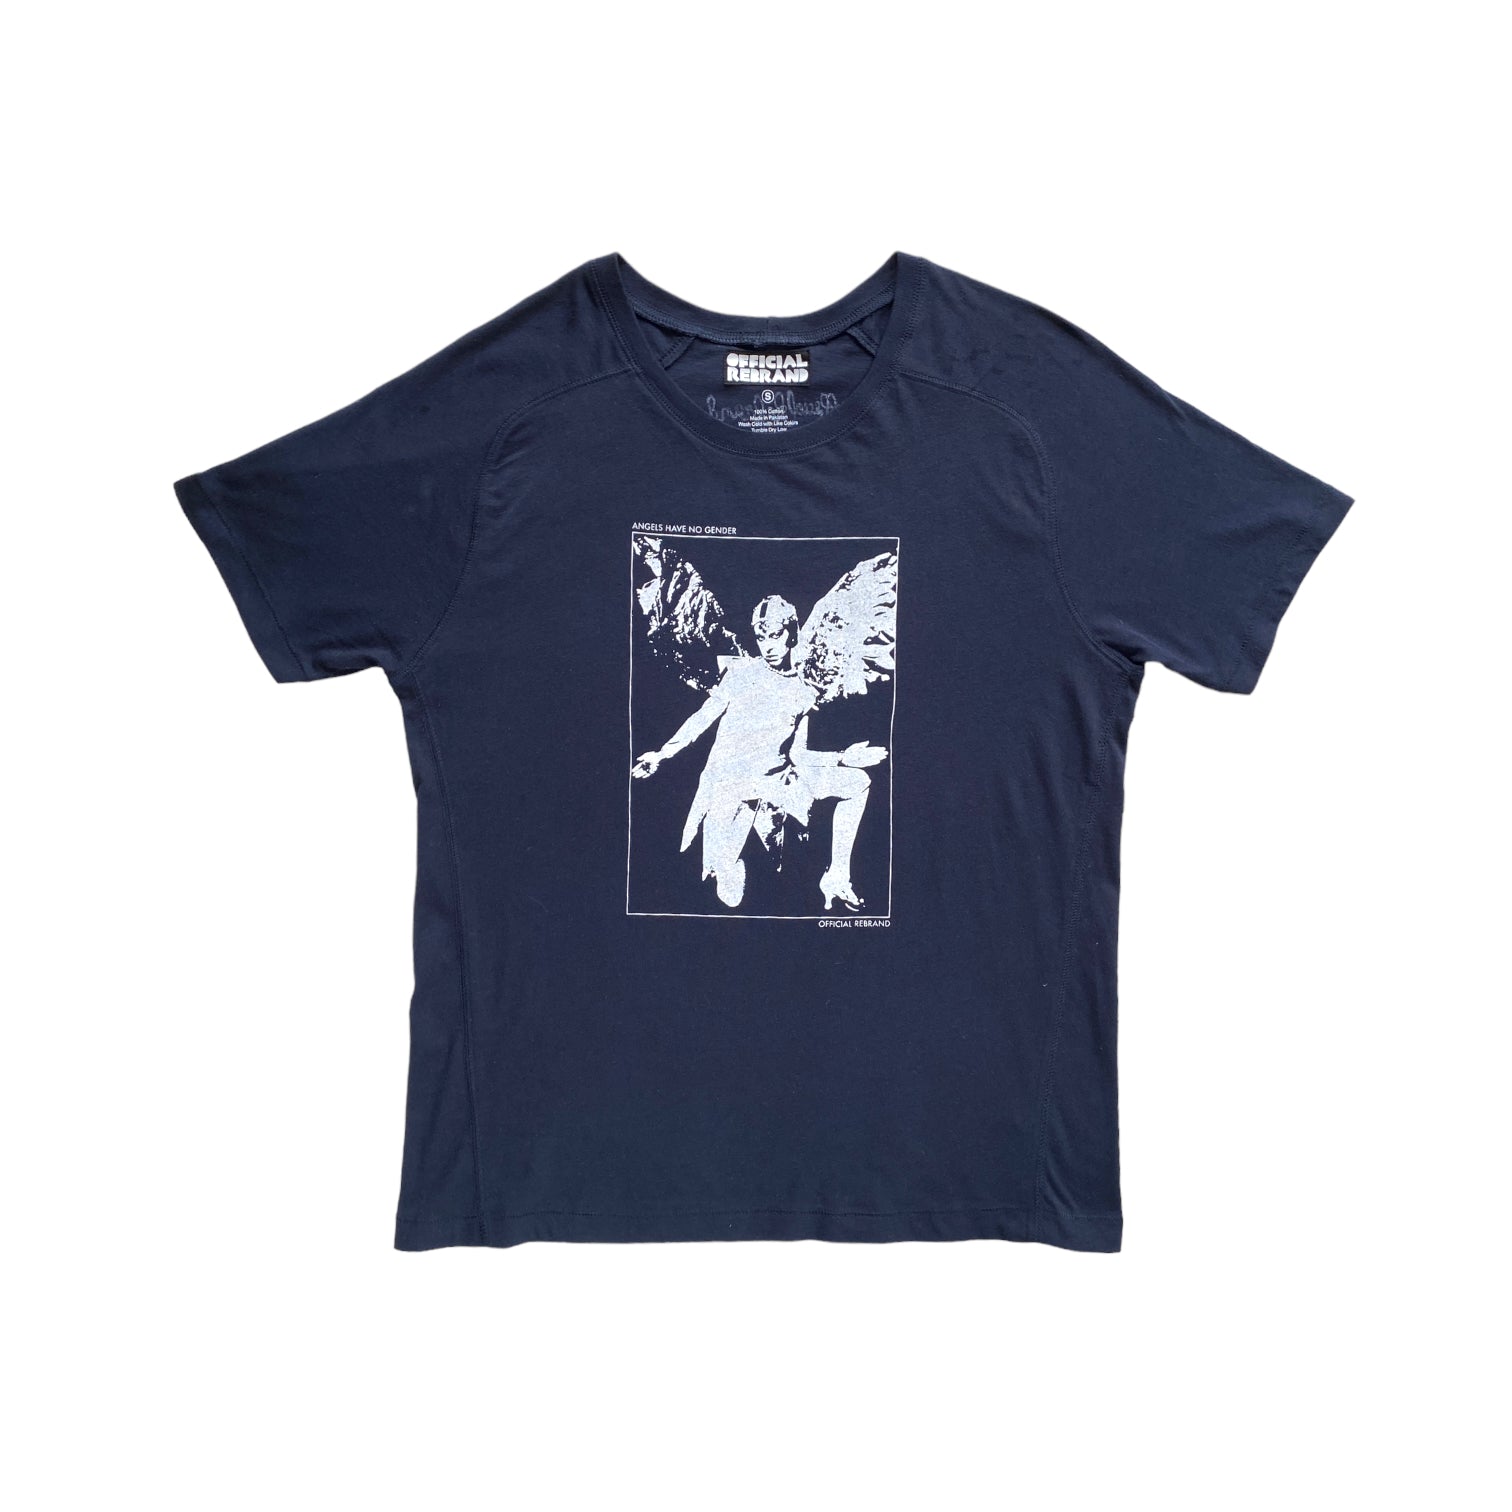 navy blue t-shirt with white screen-printed claud cahun kneeling angel image and text reading ANGELS HAVE NO GENDER at the top and OFFICIAL REBRAND at the bottom